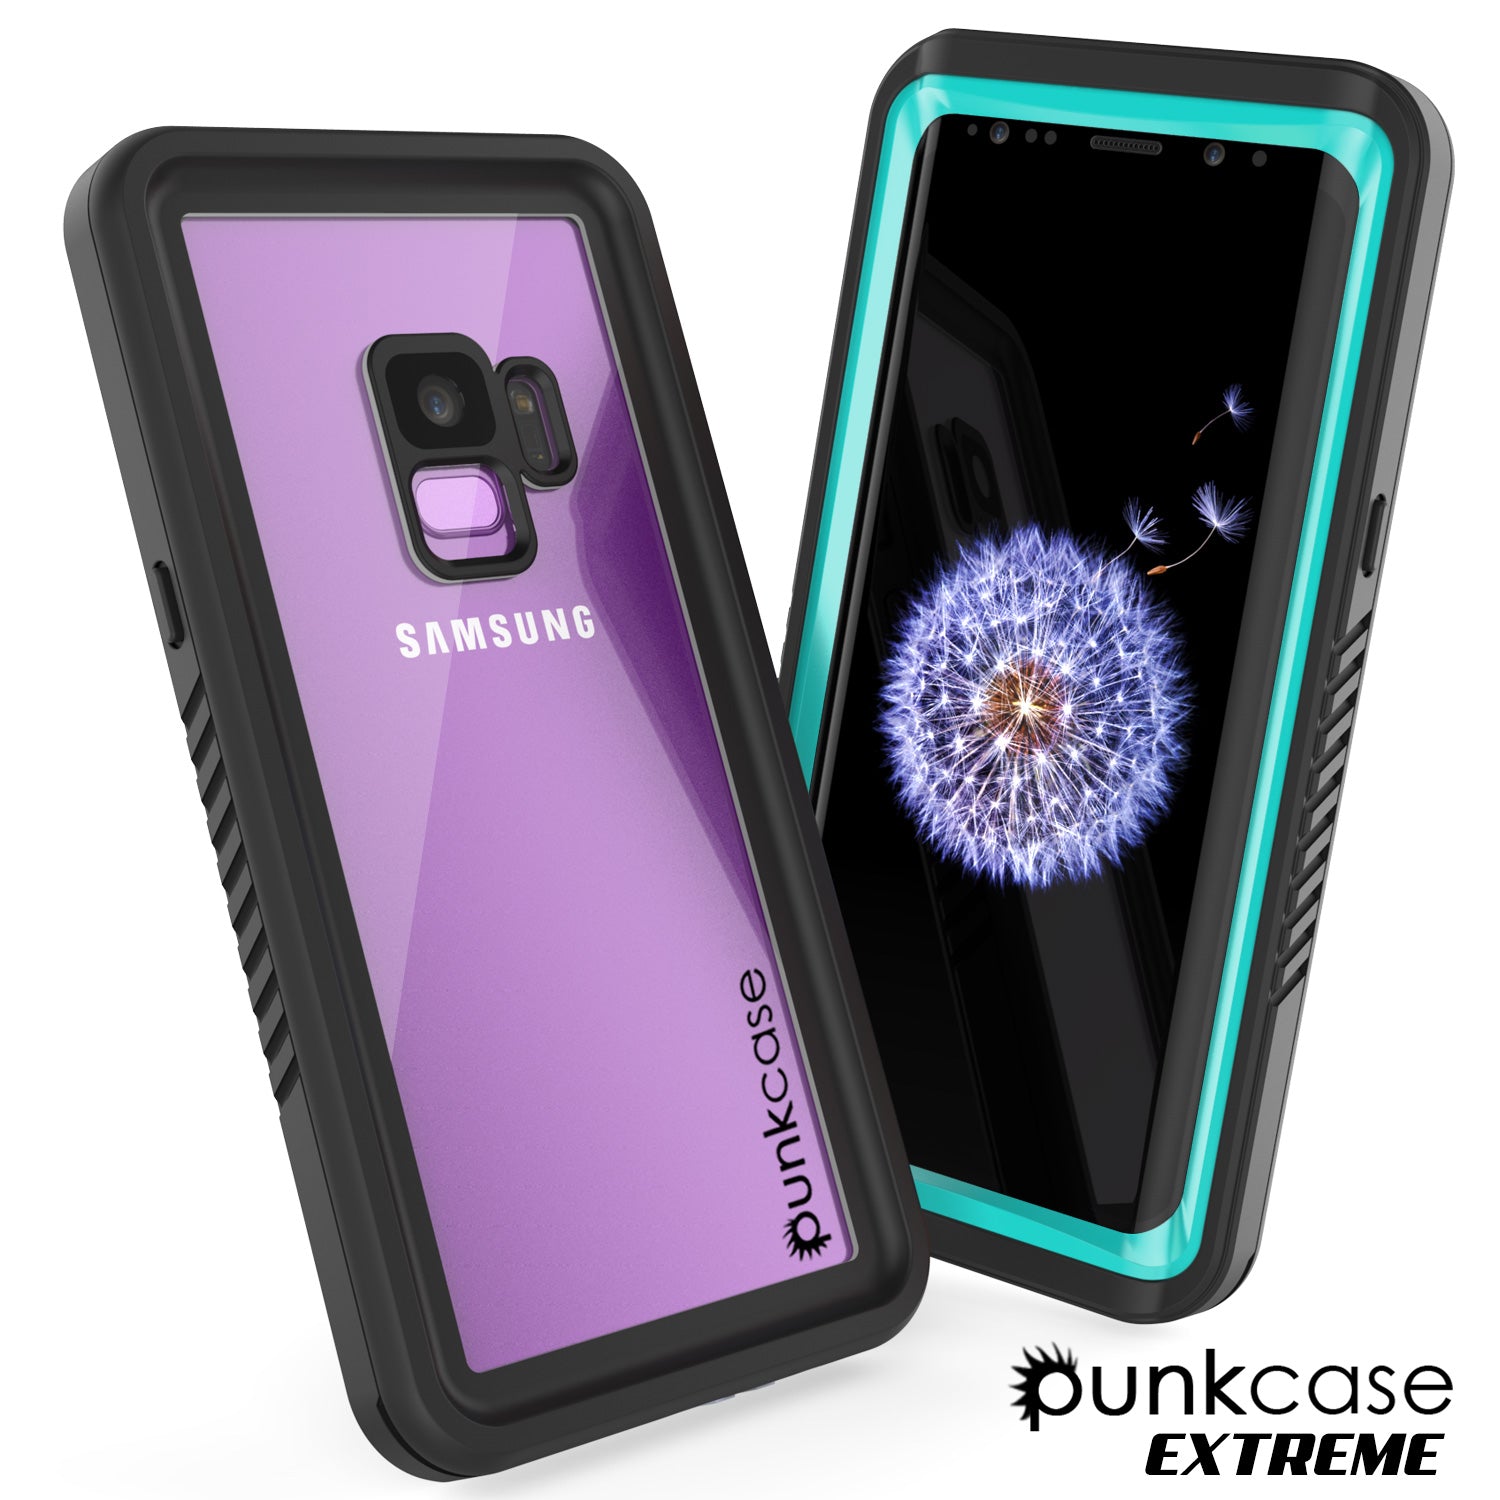 Galaxy S9 Plus, Punkcase Extreme W/ Built Screen Protector [Teal]